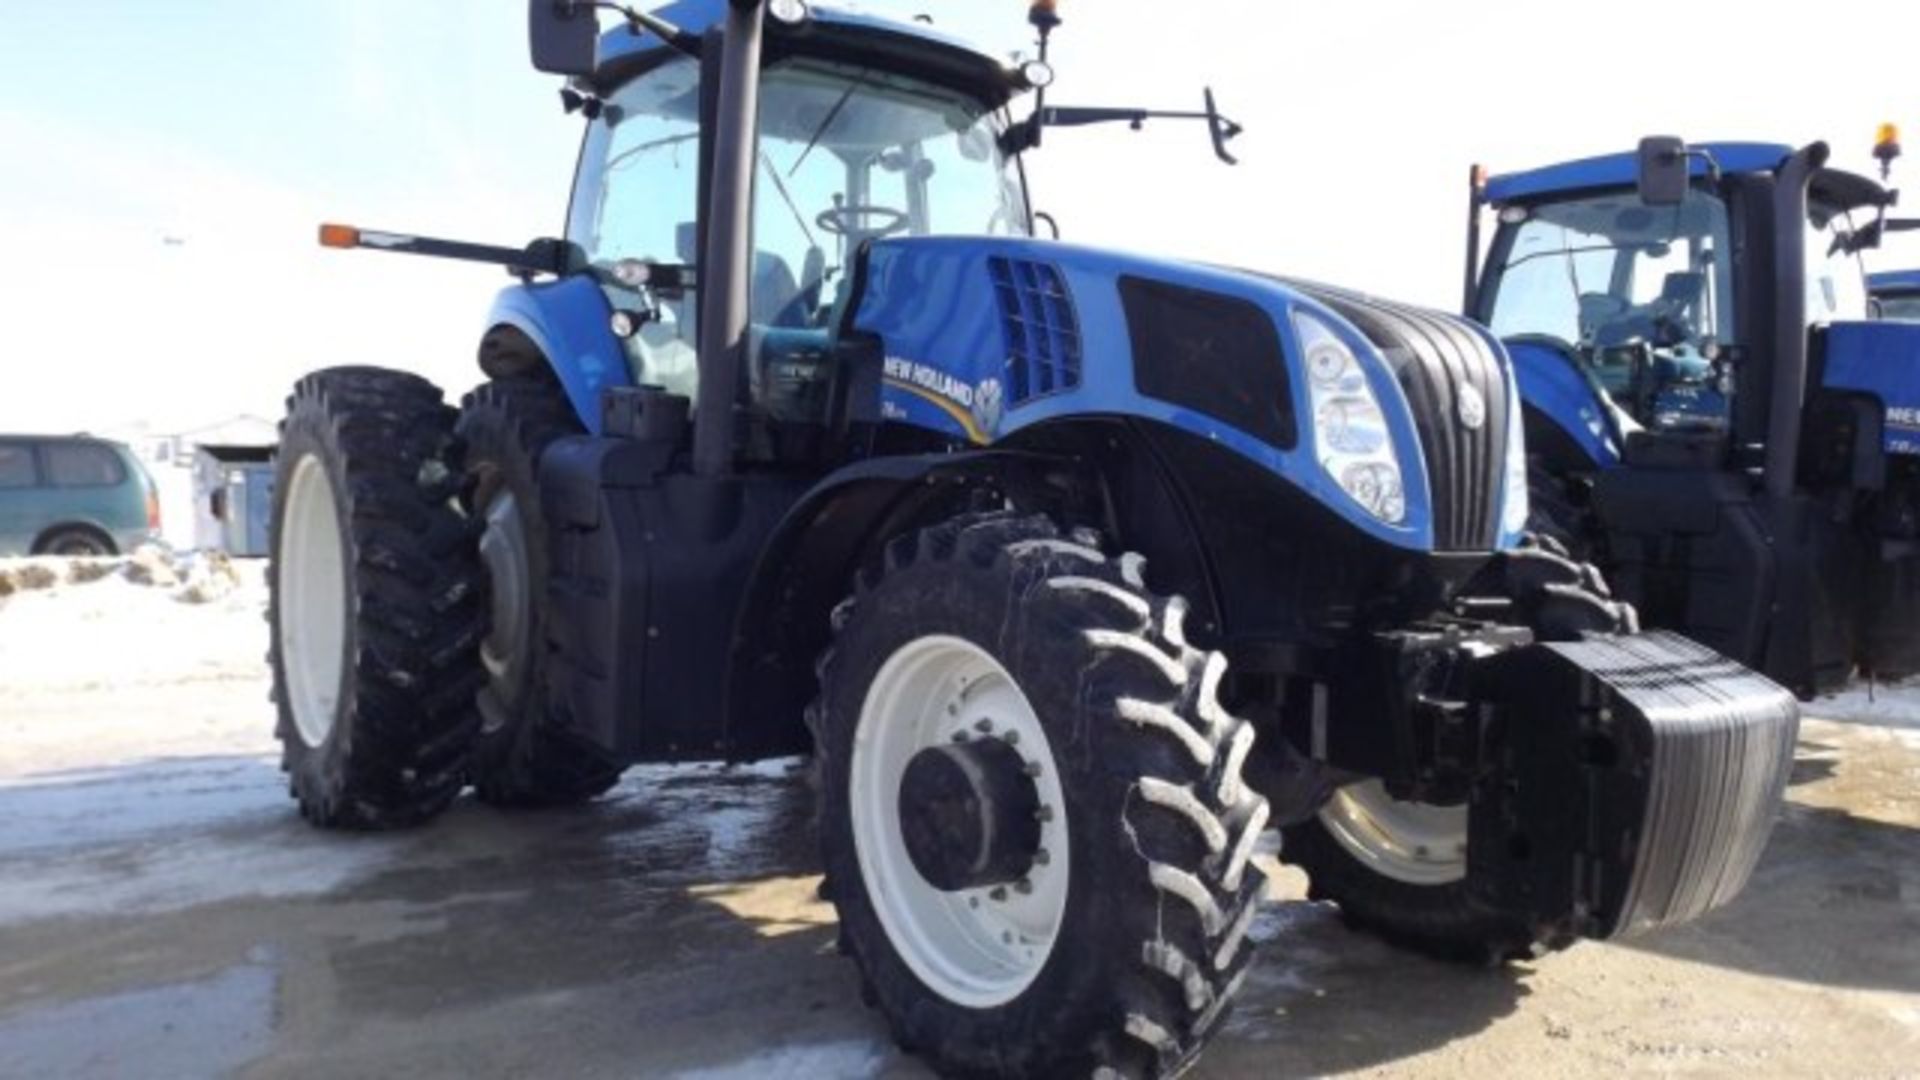 New Holland T8.275 Tractor '12, sn#ZCRC03823 2101 Hrs, MFWD, Deluxe Cab, Buddy Seat, 235 HP, 18/4 - Image 3 of 18